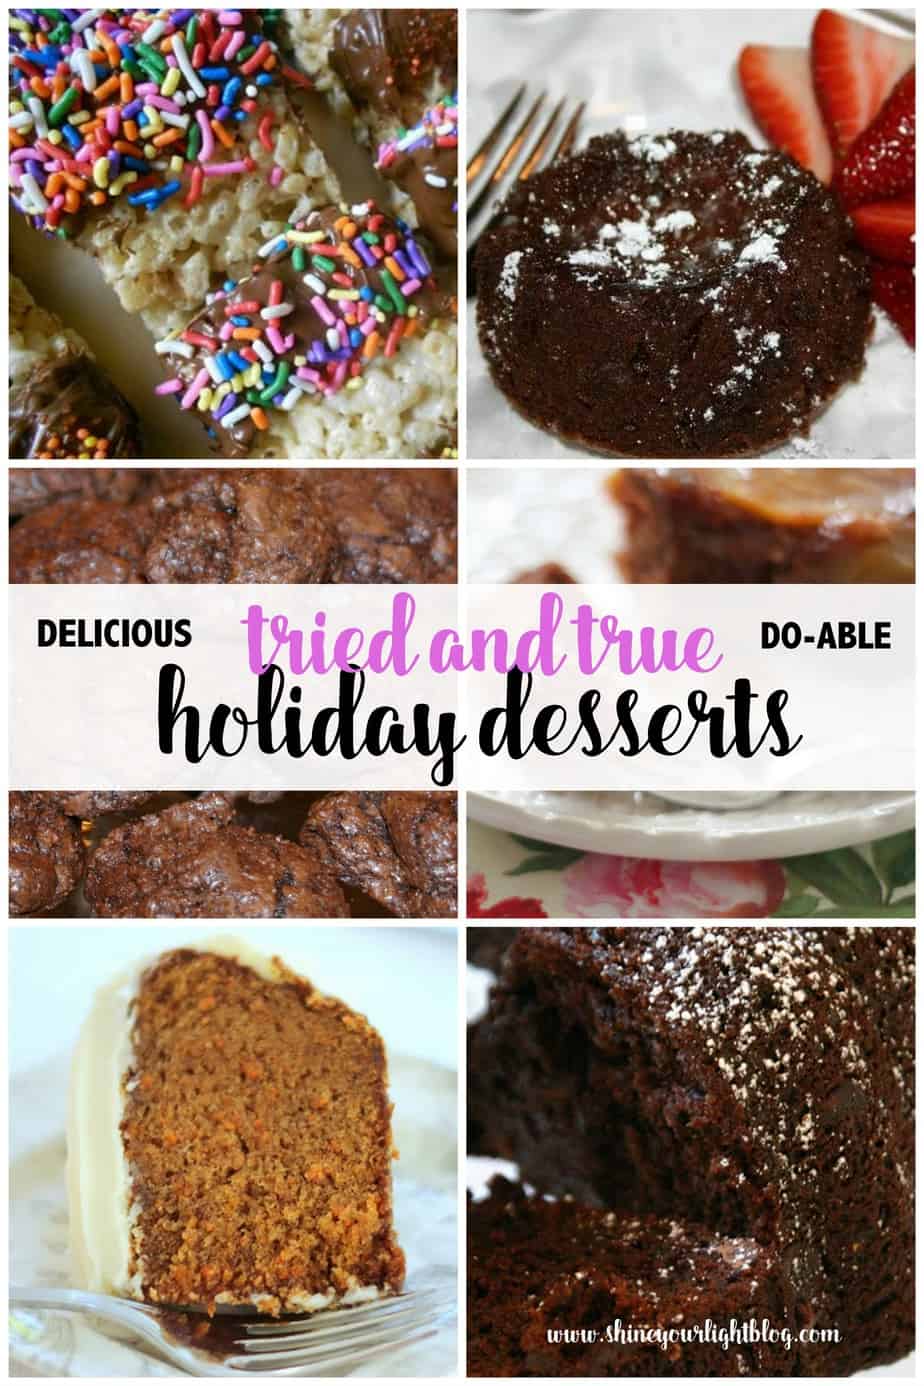 Tried and true holiday desserts for all your holiday needs!